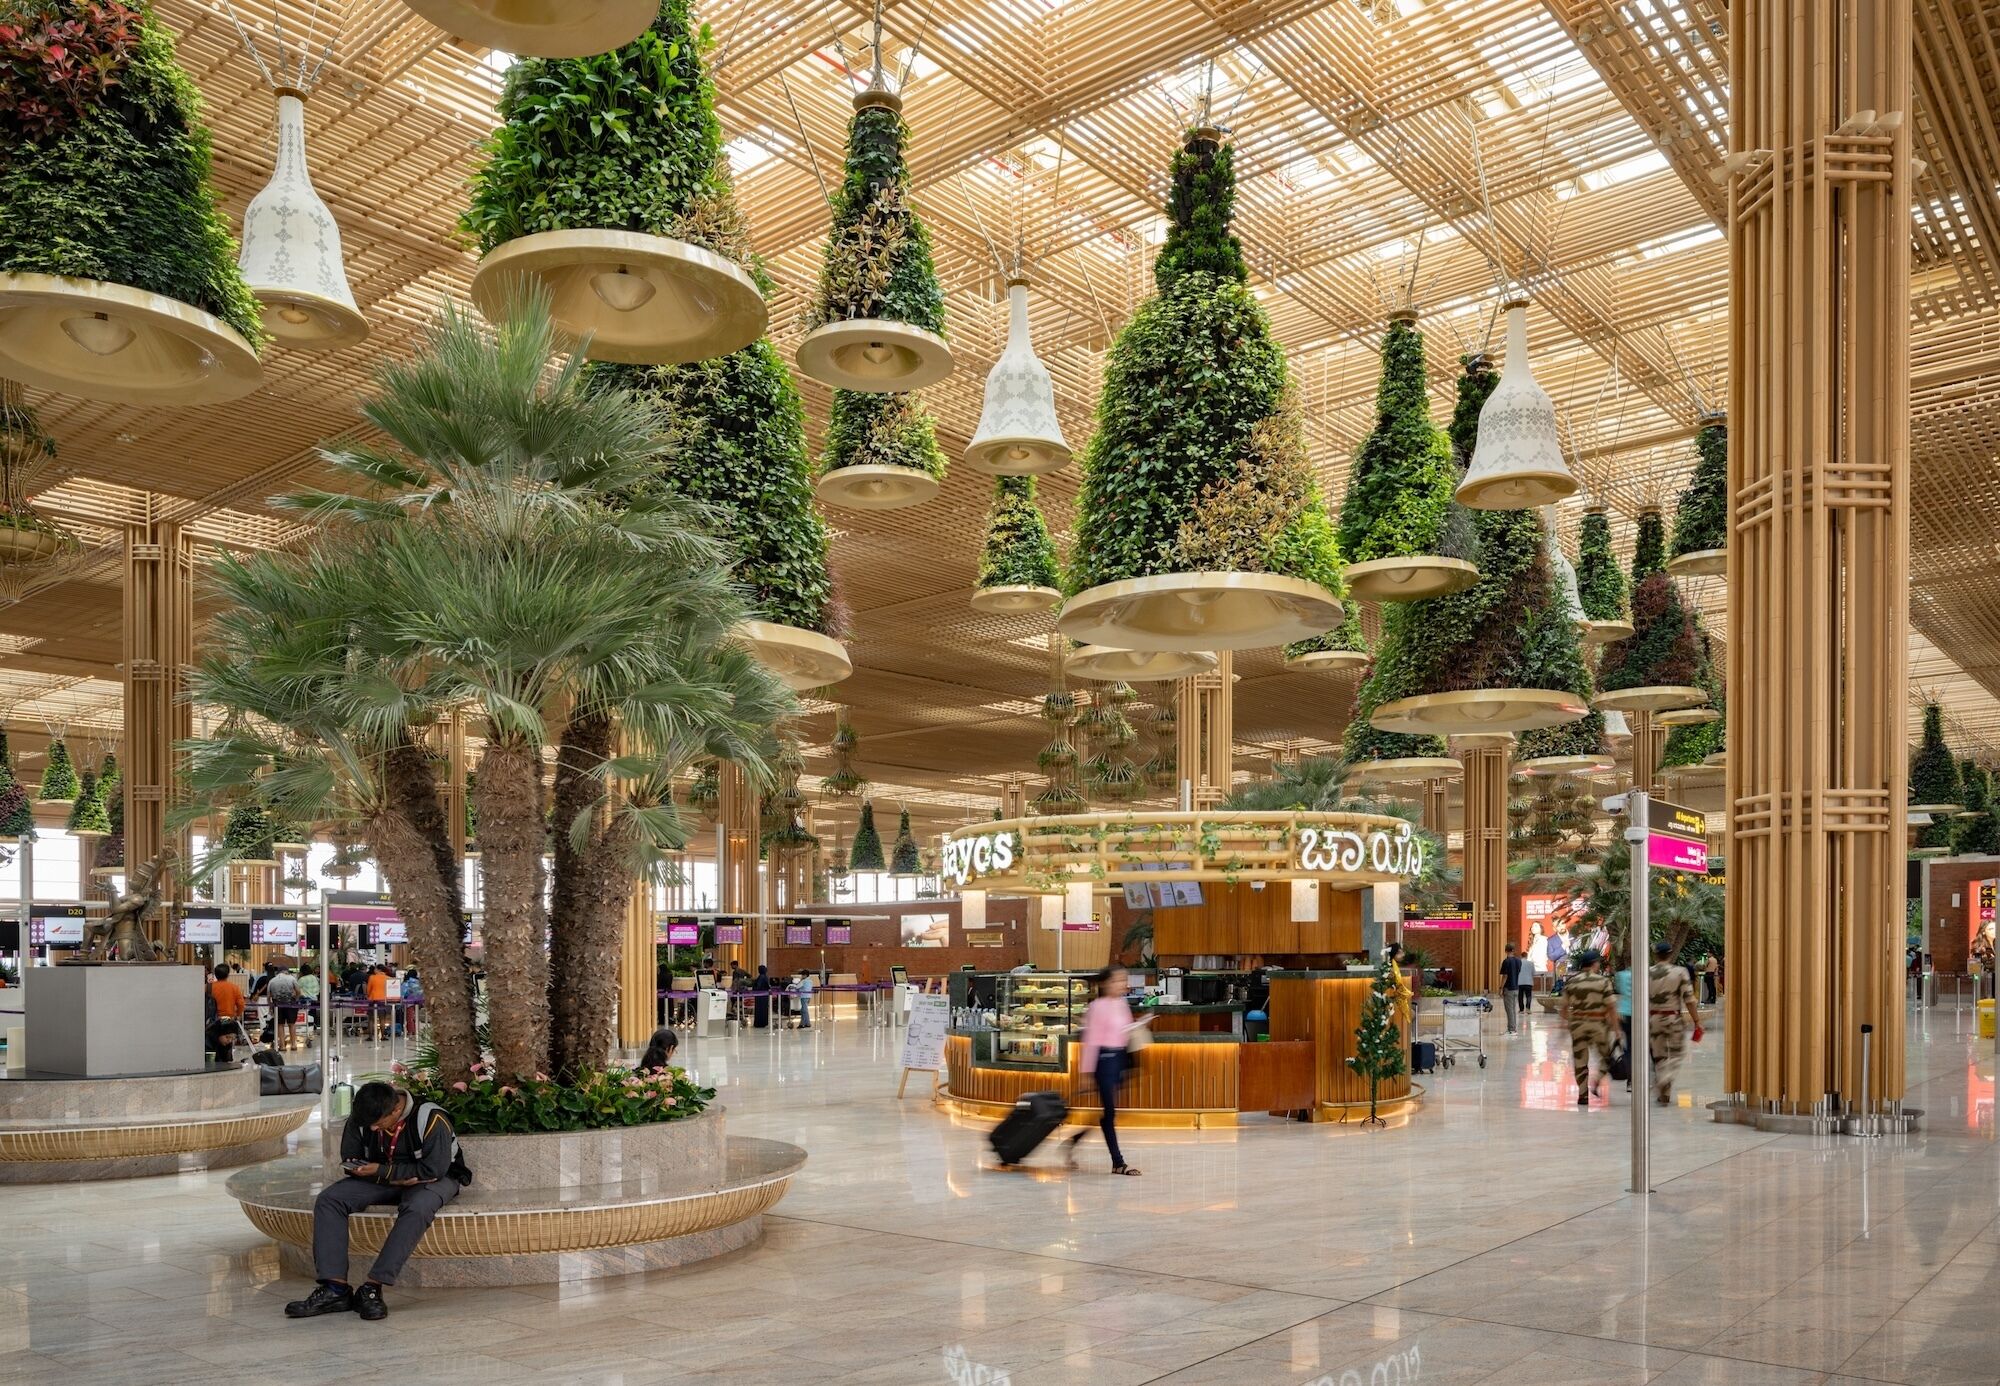 The ambitious journey towards the Terminal in a Garden